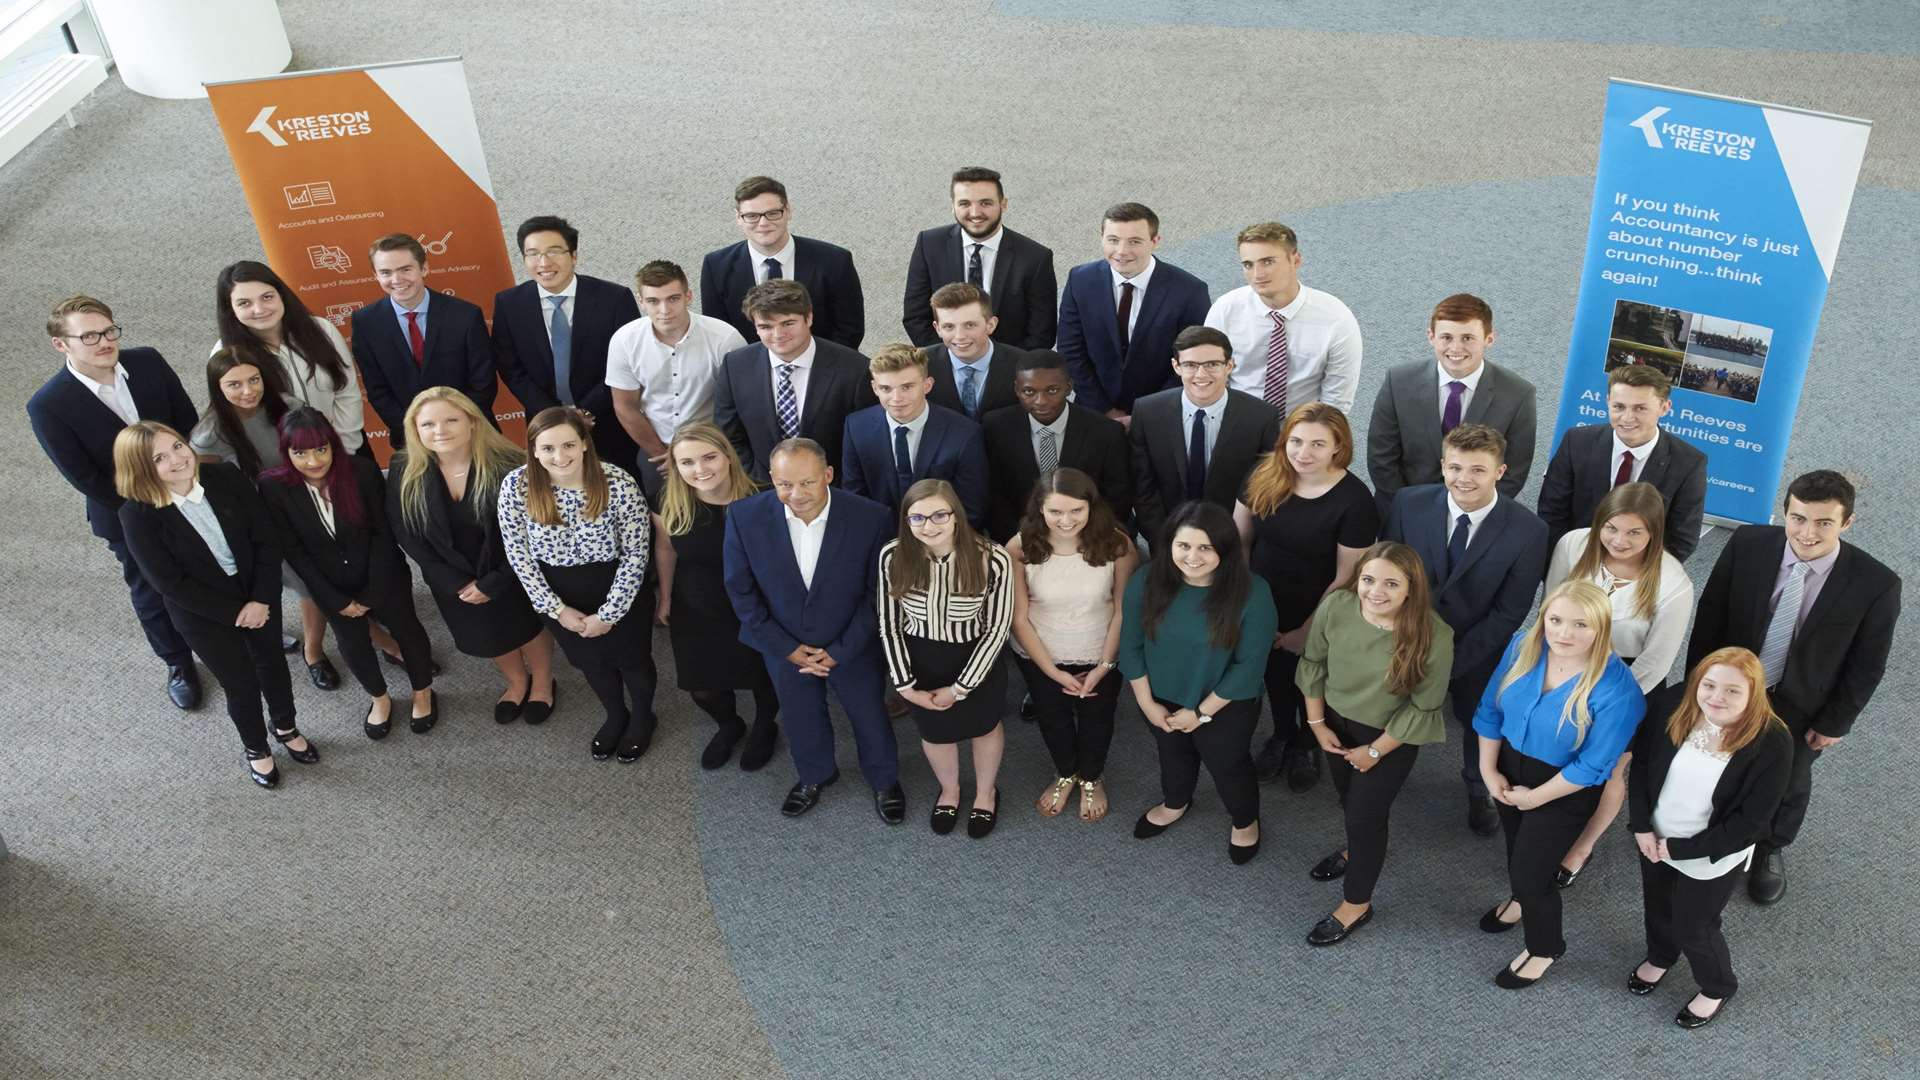 Kreston Reeves has hired a record 32 students and trainees